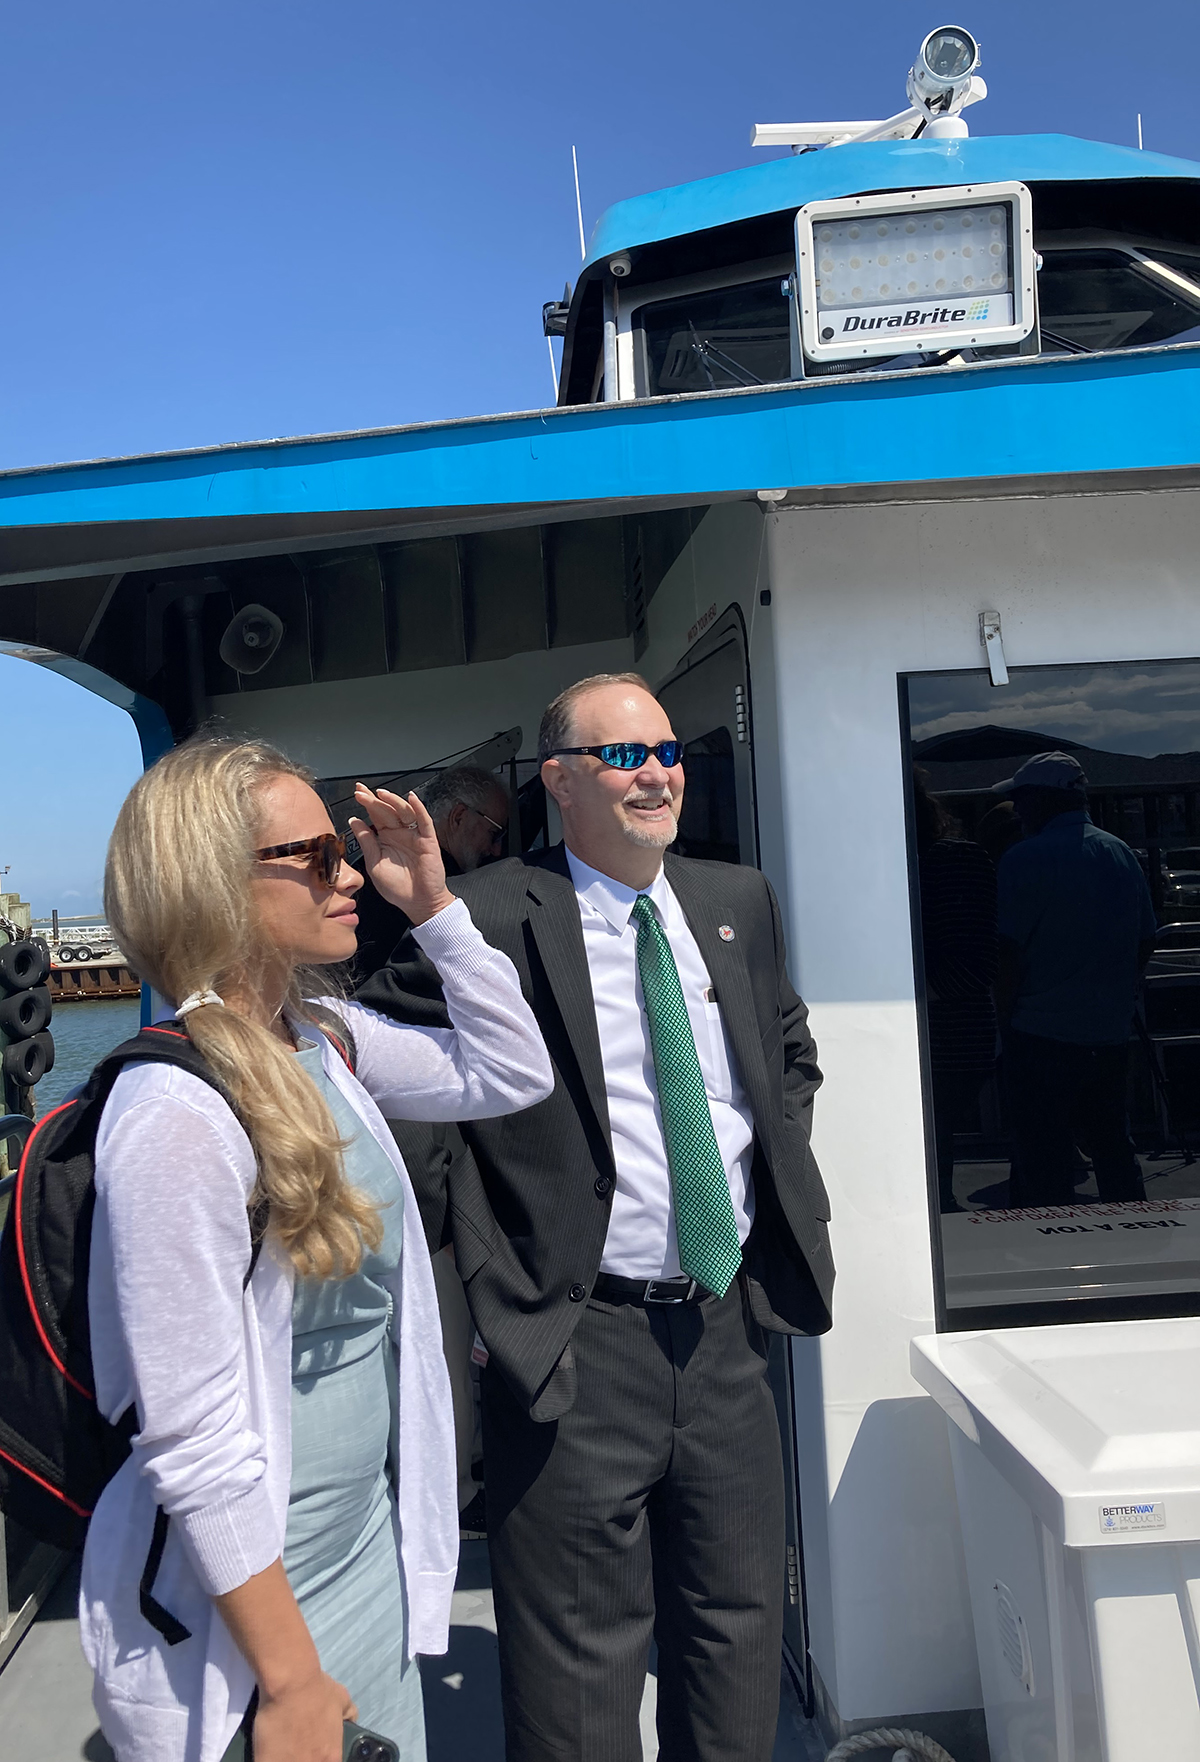 N.C. Department of Transportation Chief Communications Officers Carly Olexik, left, and Transportation Secretary Eric Boyette take part in the event Monday aboard the Ocracoke Express. Photo: Catherine Kozak